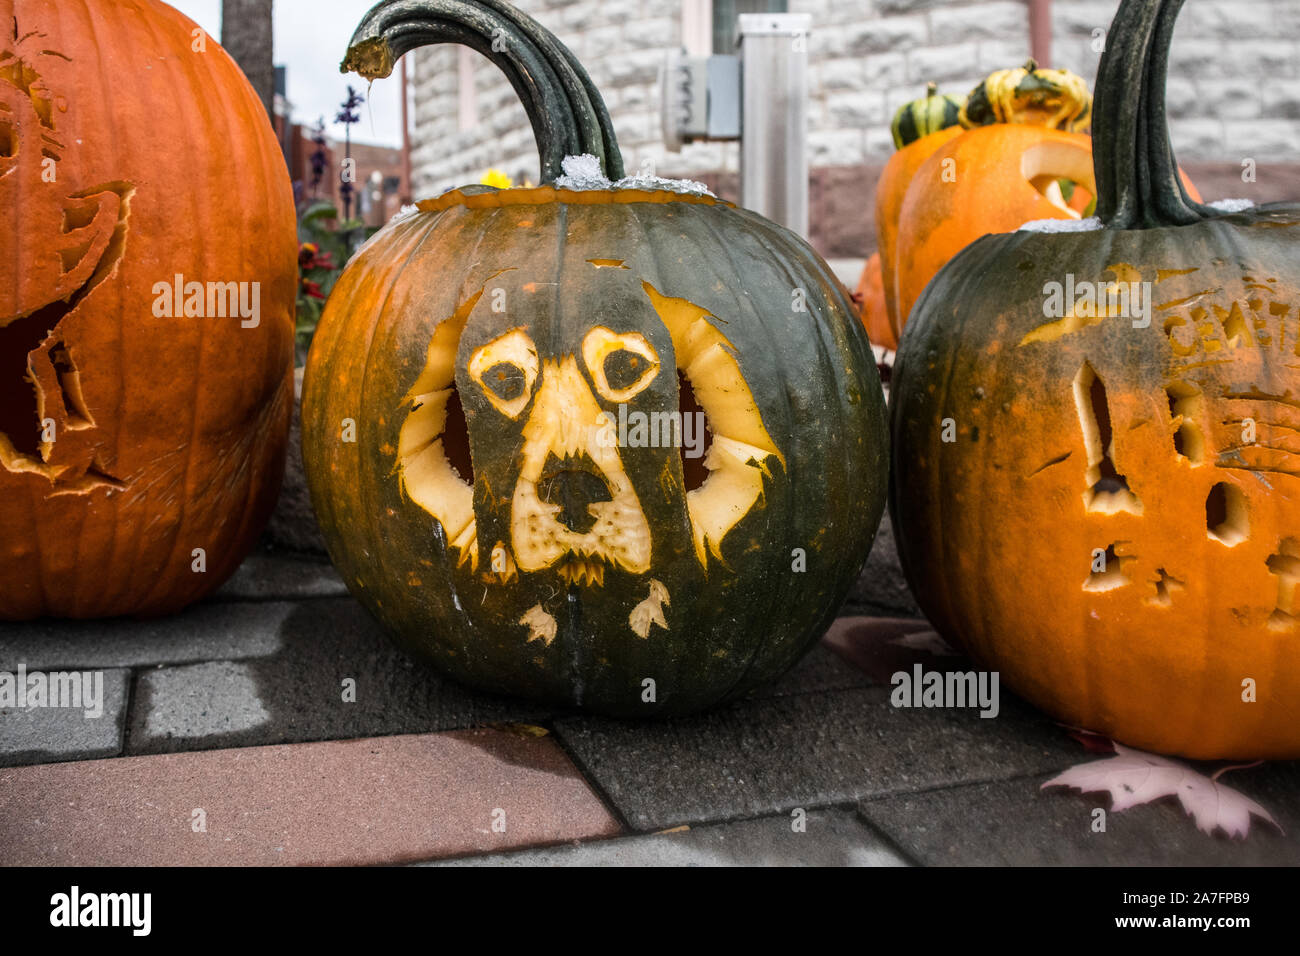 Incised and carved puppy's face in the Halloween pumpkin. Stock Photo